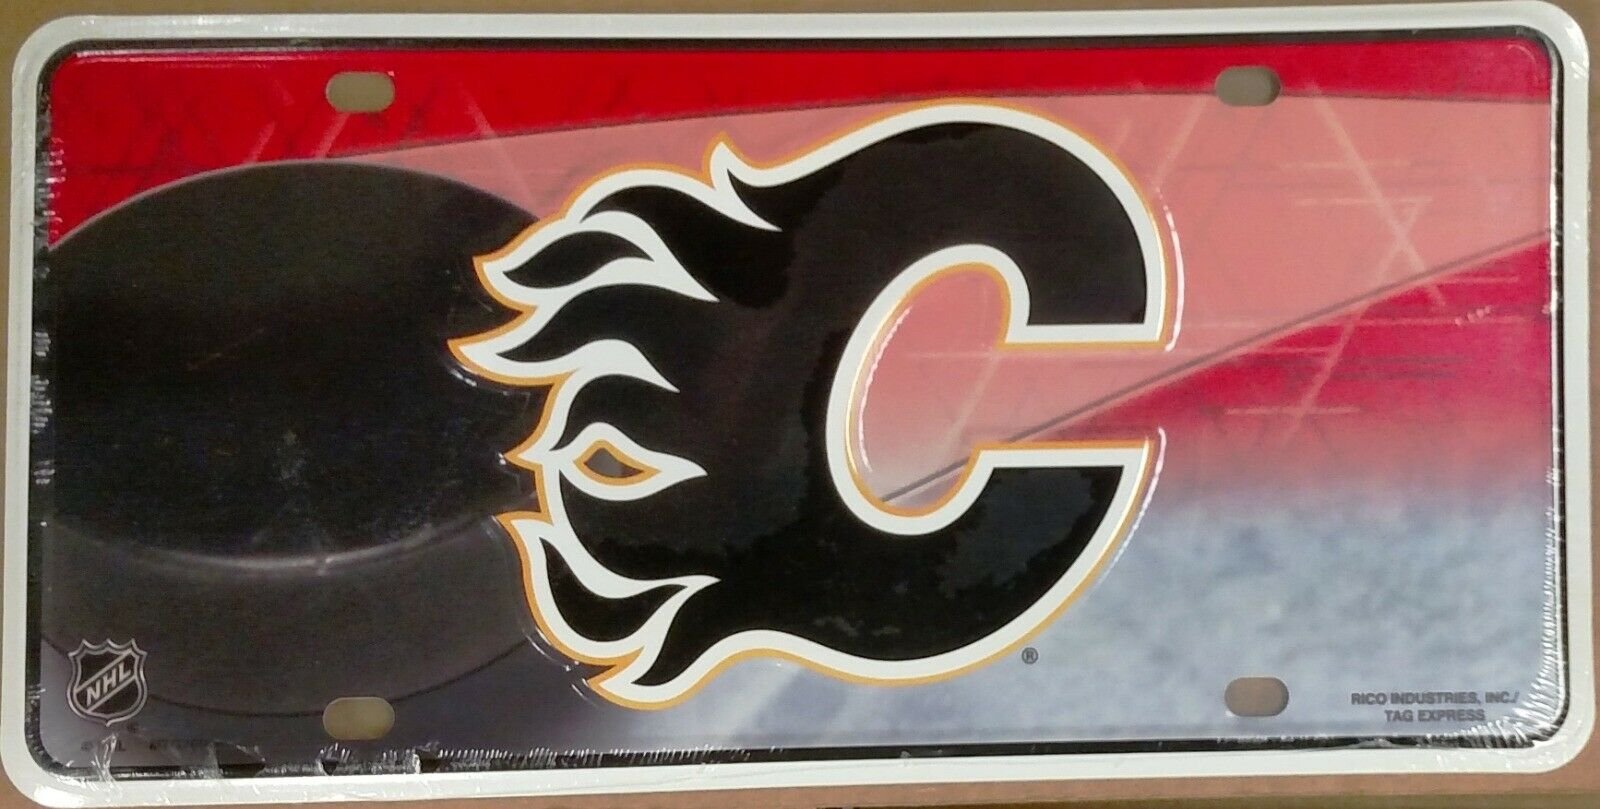 Calgary Flames Metal Auto Tag License Plate, Puck Design, 6x12 Inch